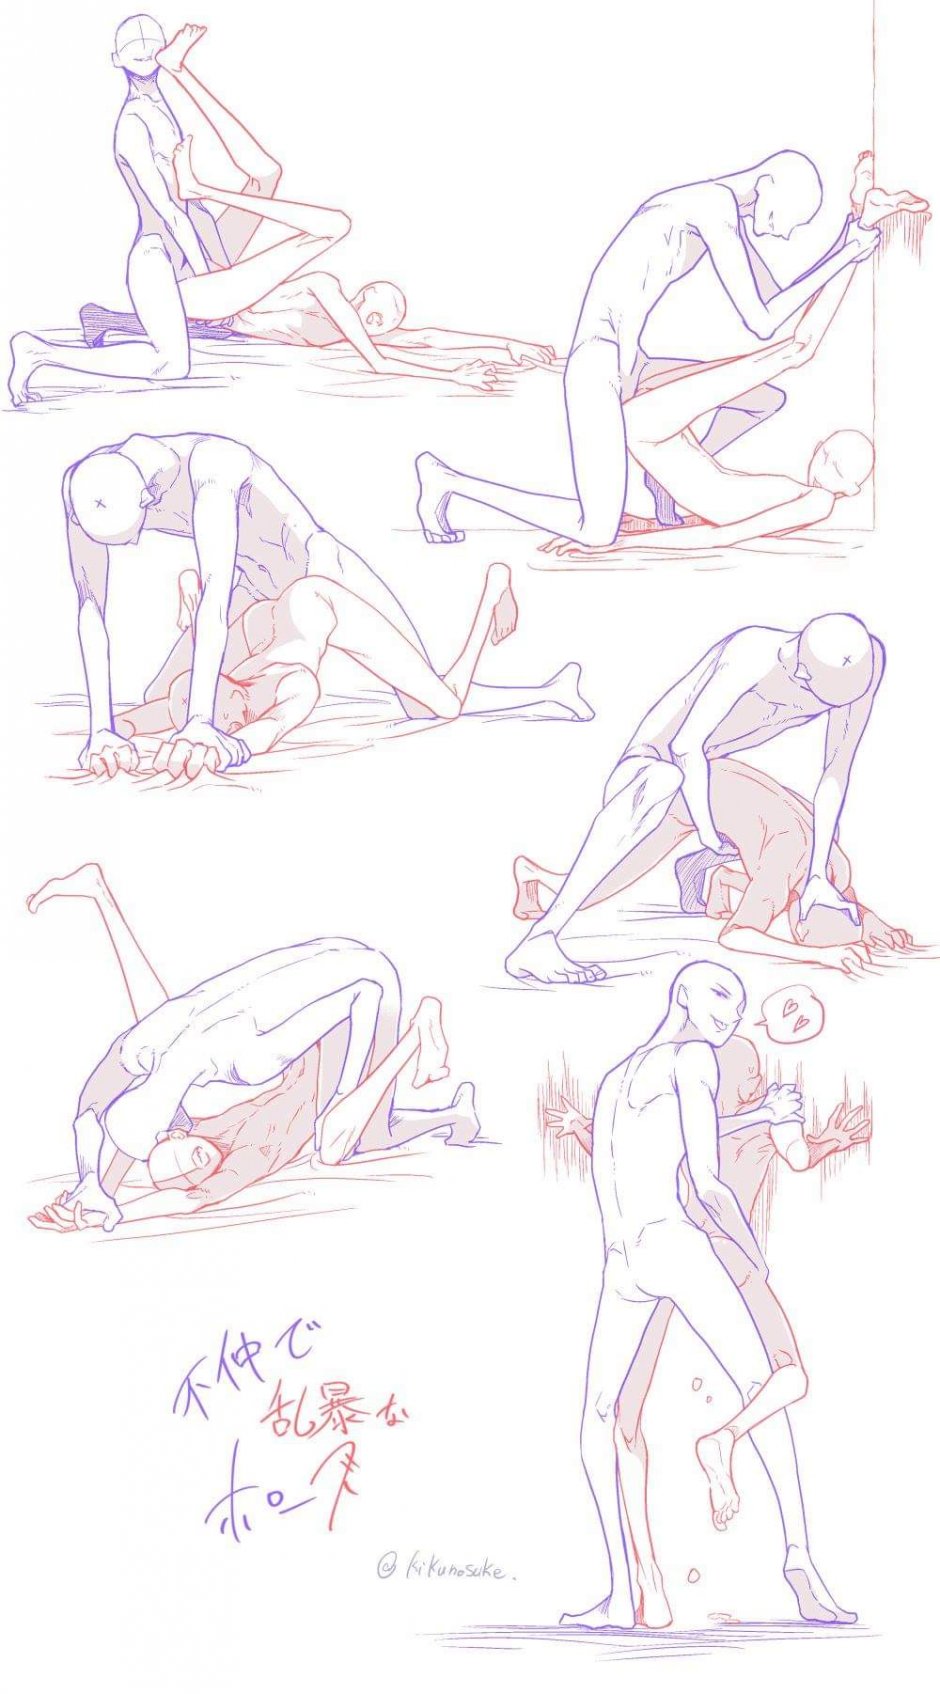 Sexual anime poses